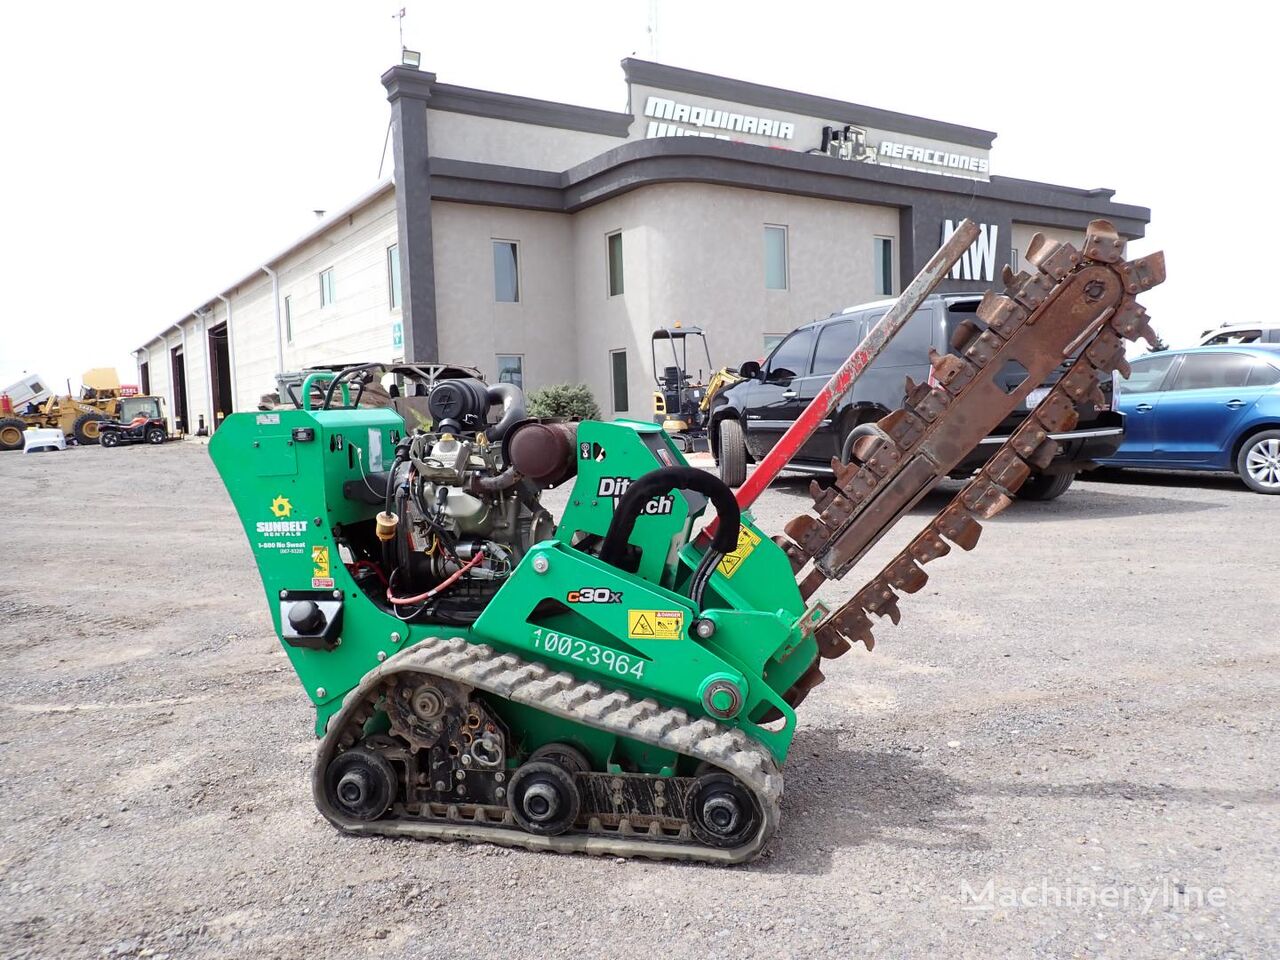 Ditch-Witch DITCH WITCH C30X trencher